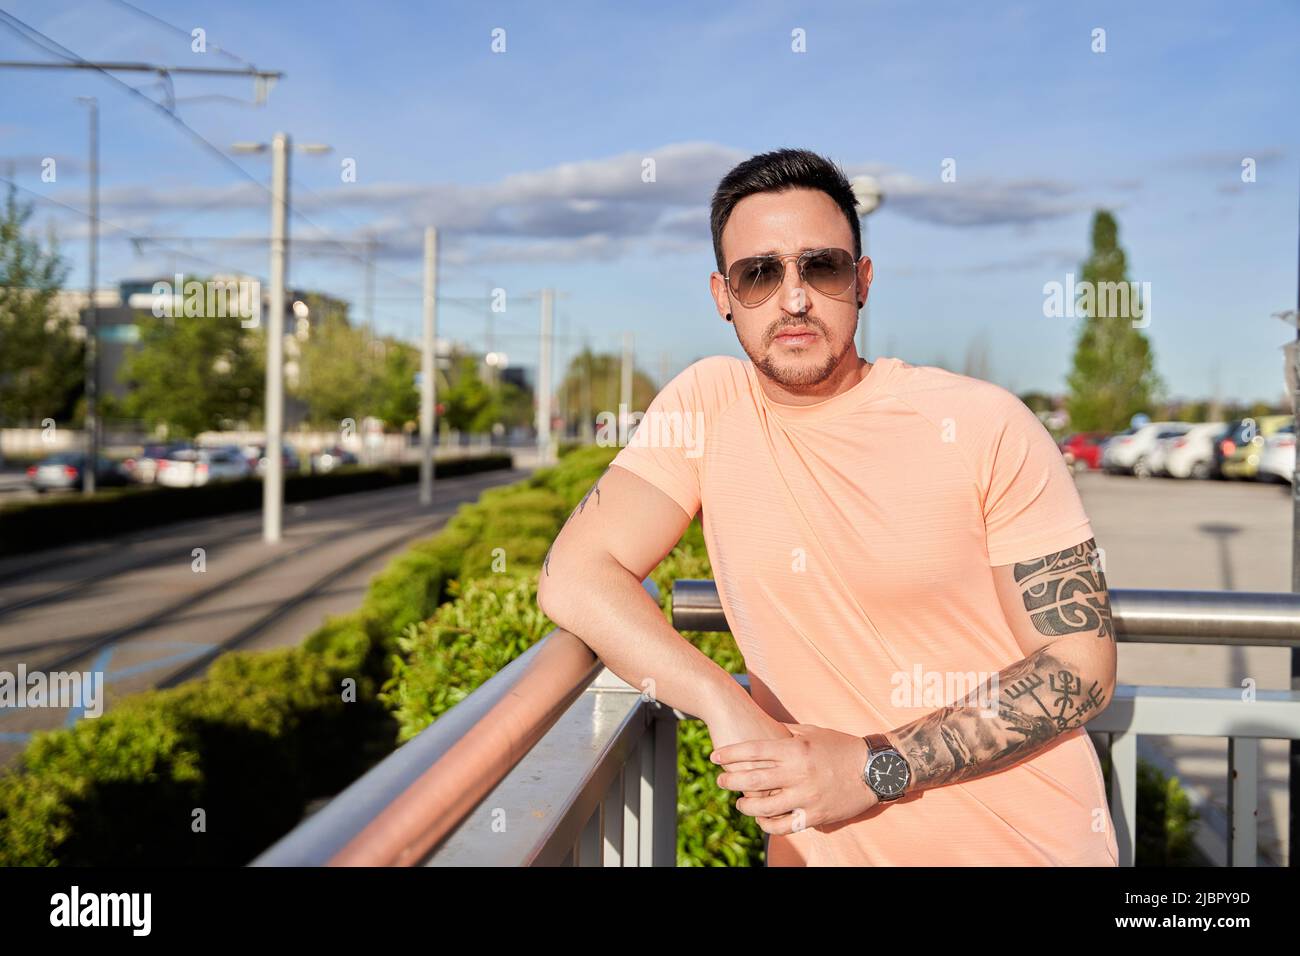 Serious young man, wearing a T-shirt and sunglasses, with a tattoo on his arm, standing on a bridge and looking at the camera on a sunny day on a city street. Stock Photo